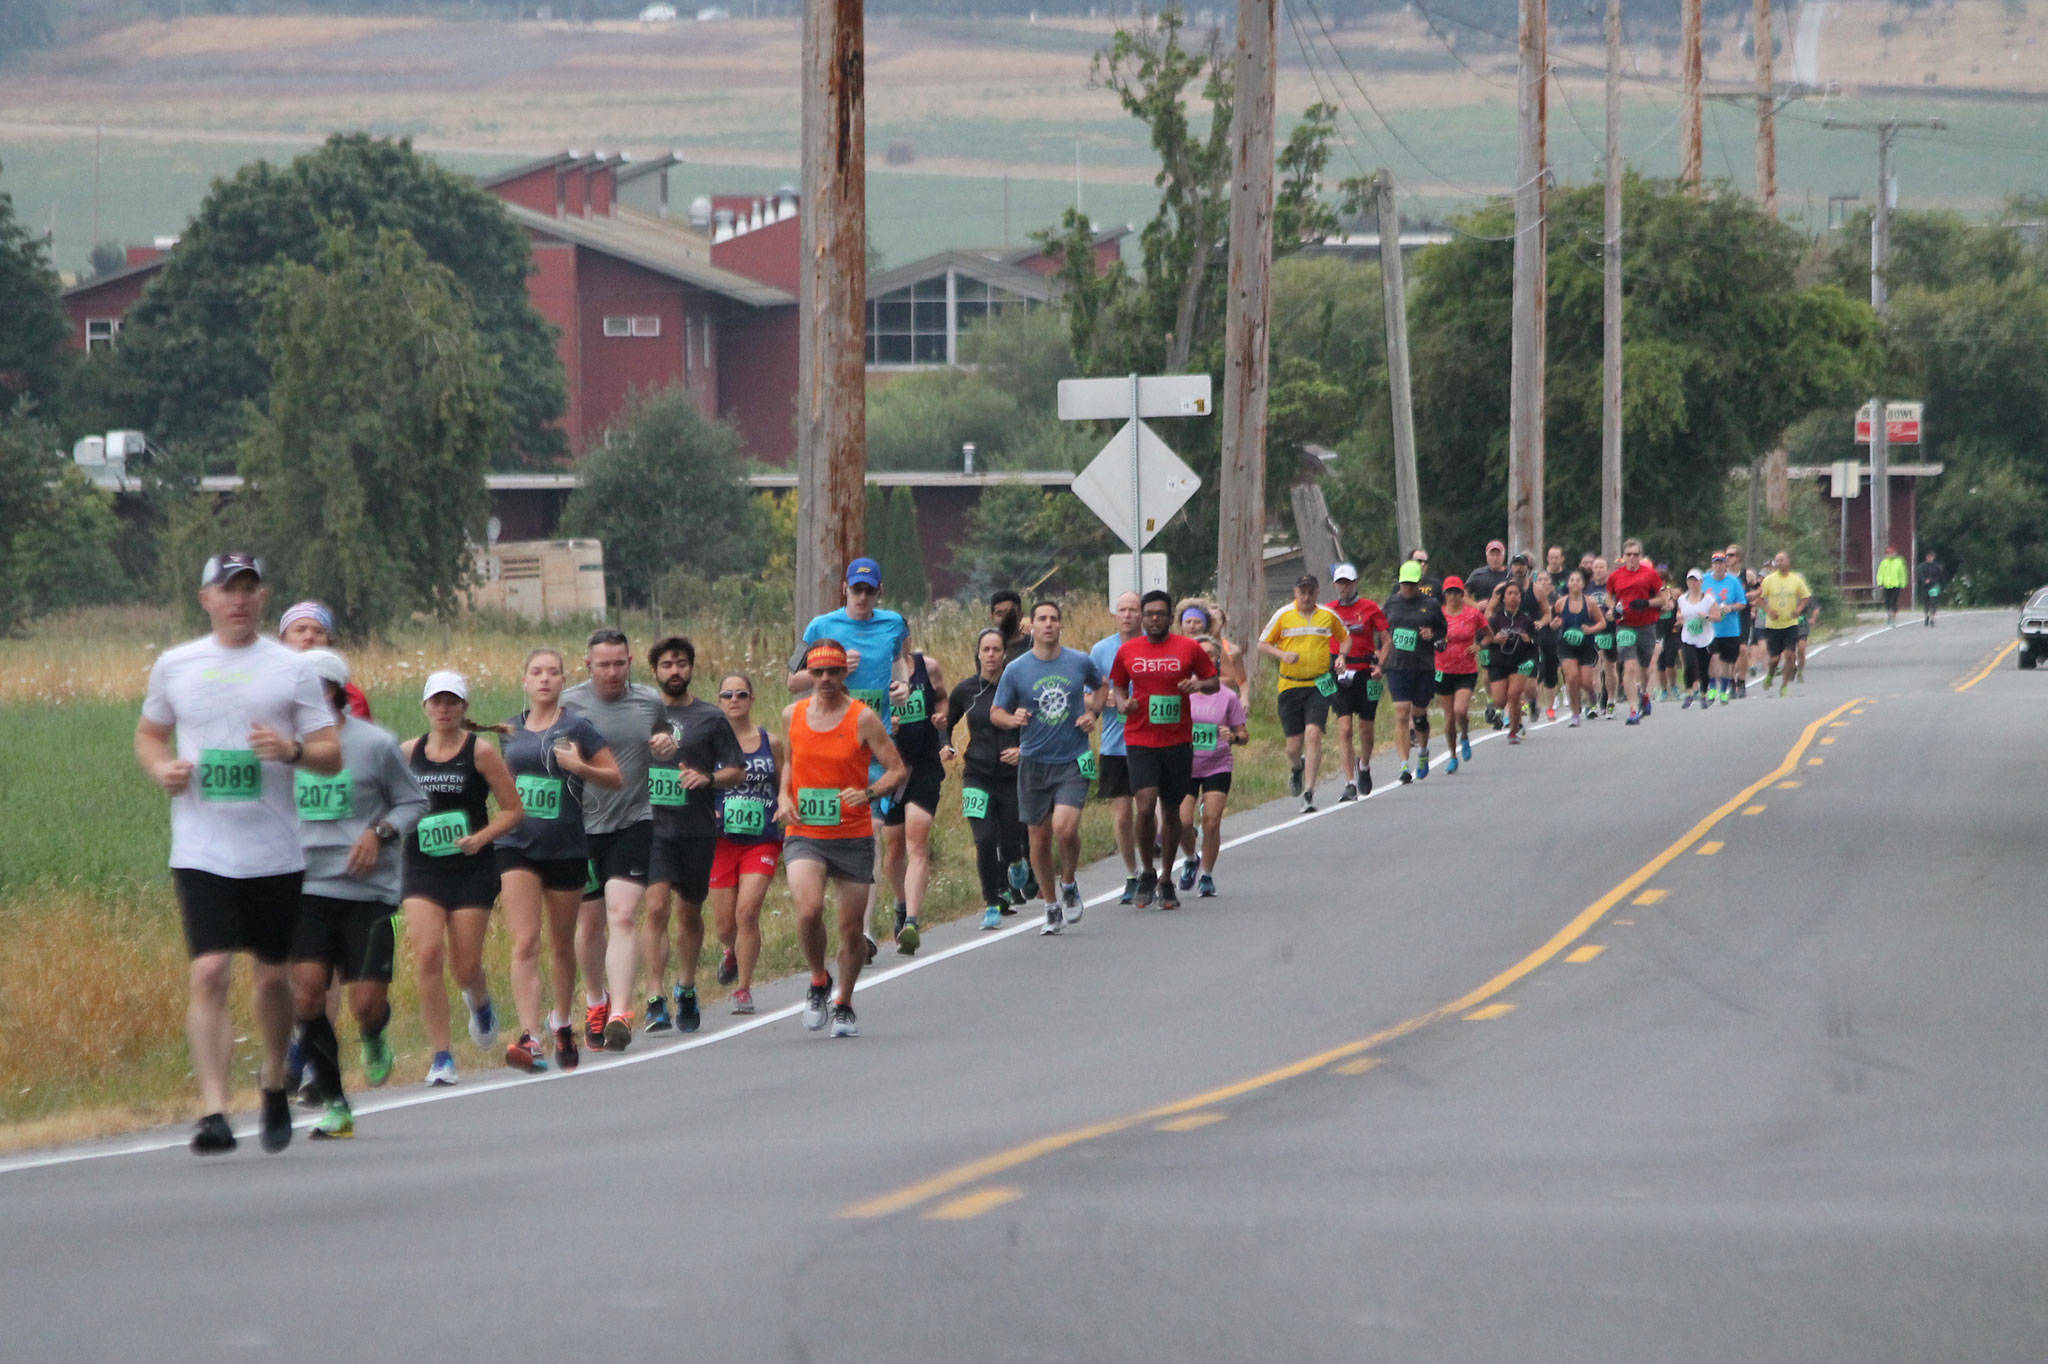 Runners in the half marathon jog up Terry Road. (Photo by Jim Waller/Whidbey News-Times)